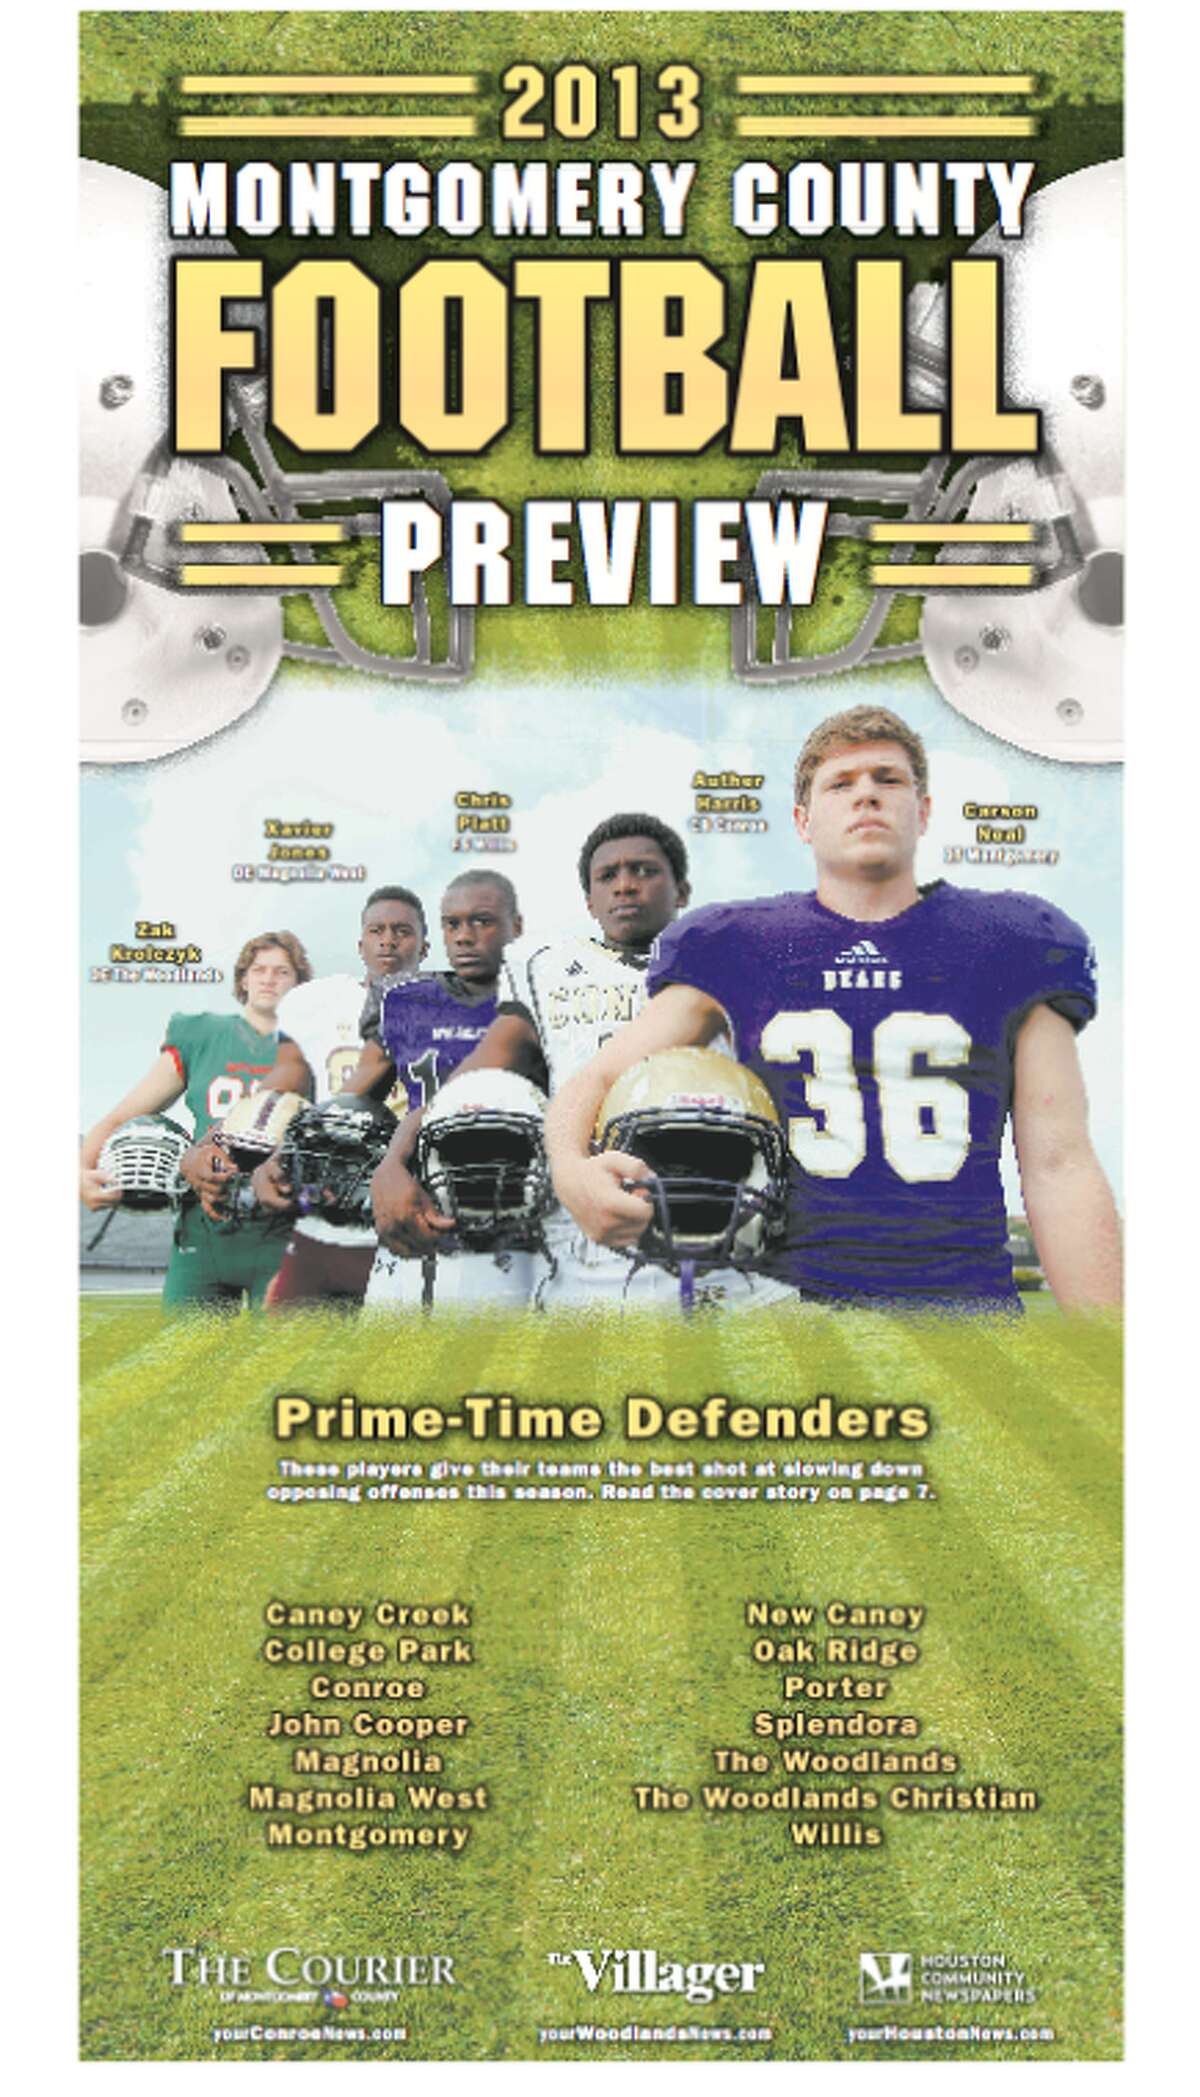 Photography: Football preview cover photo deconstructed